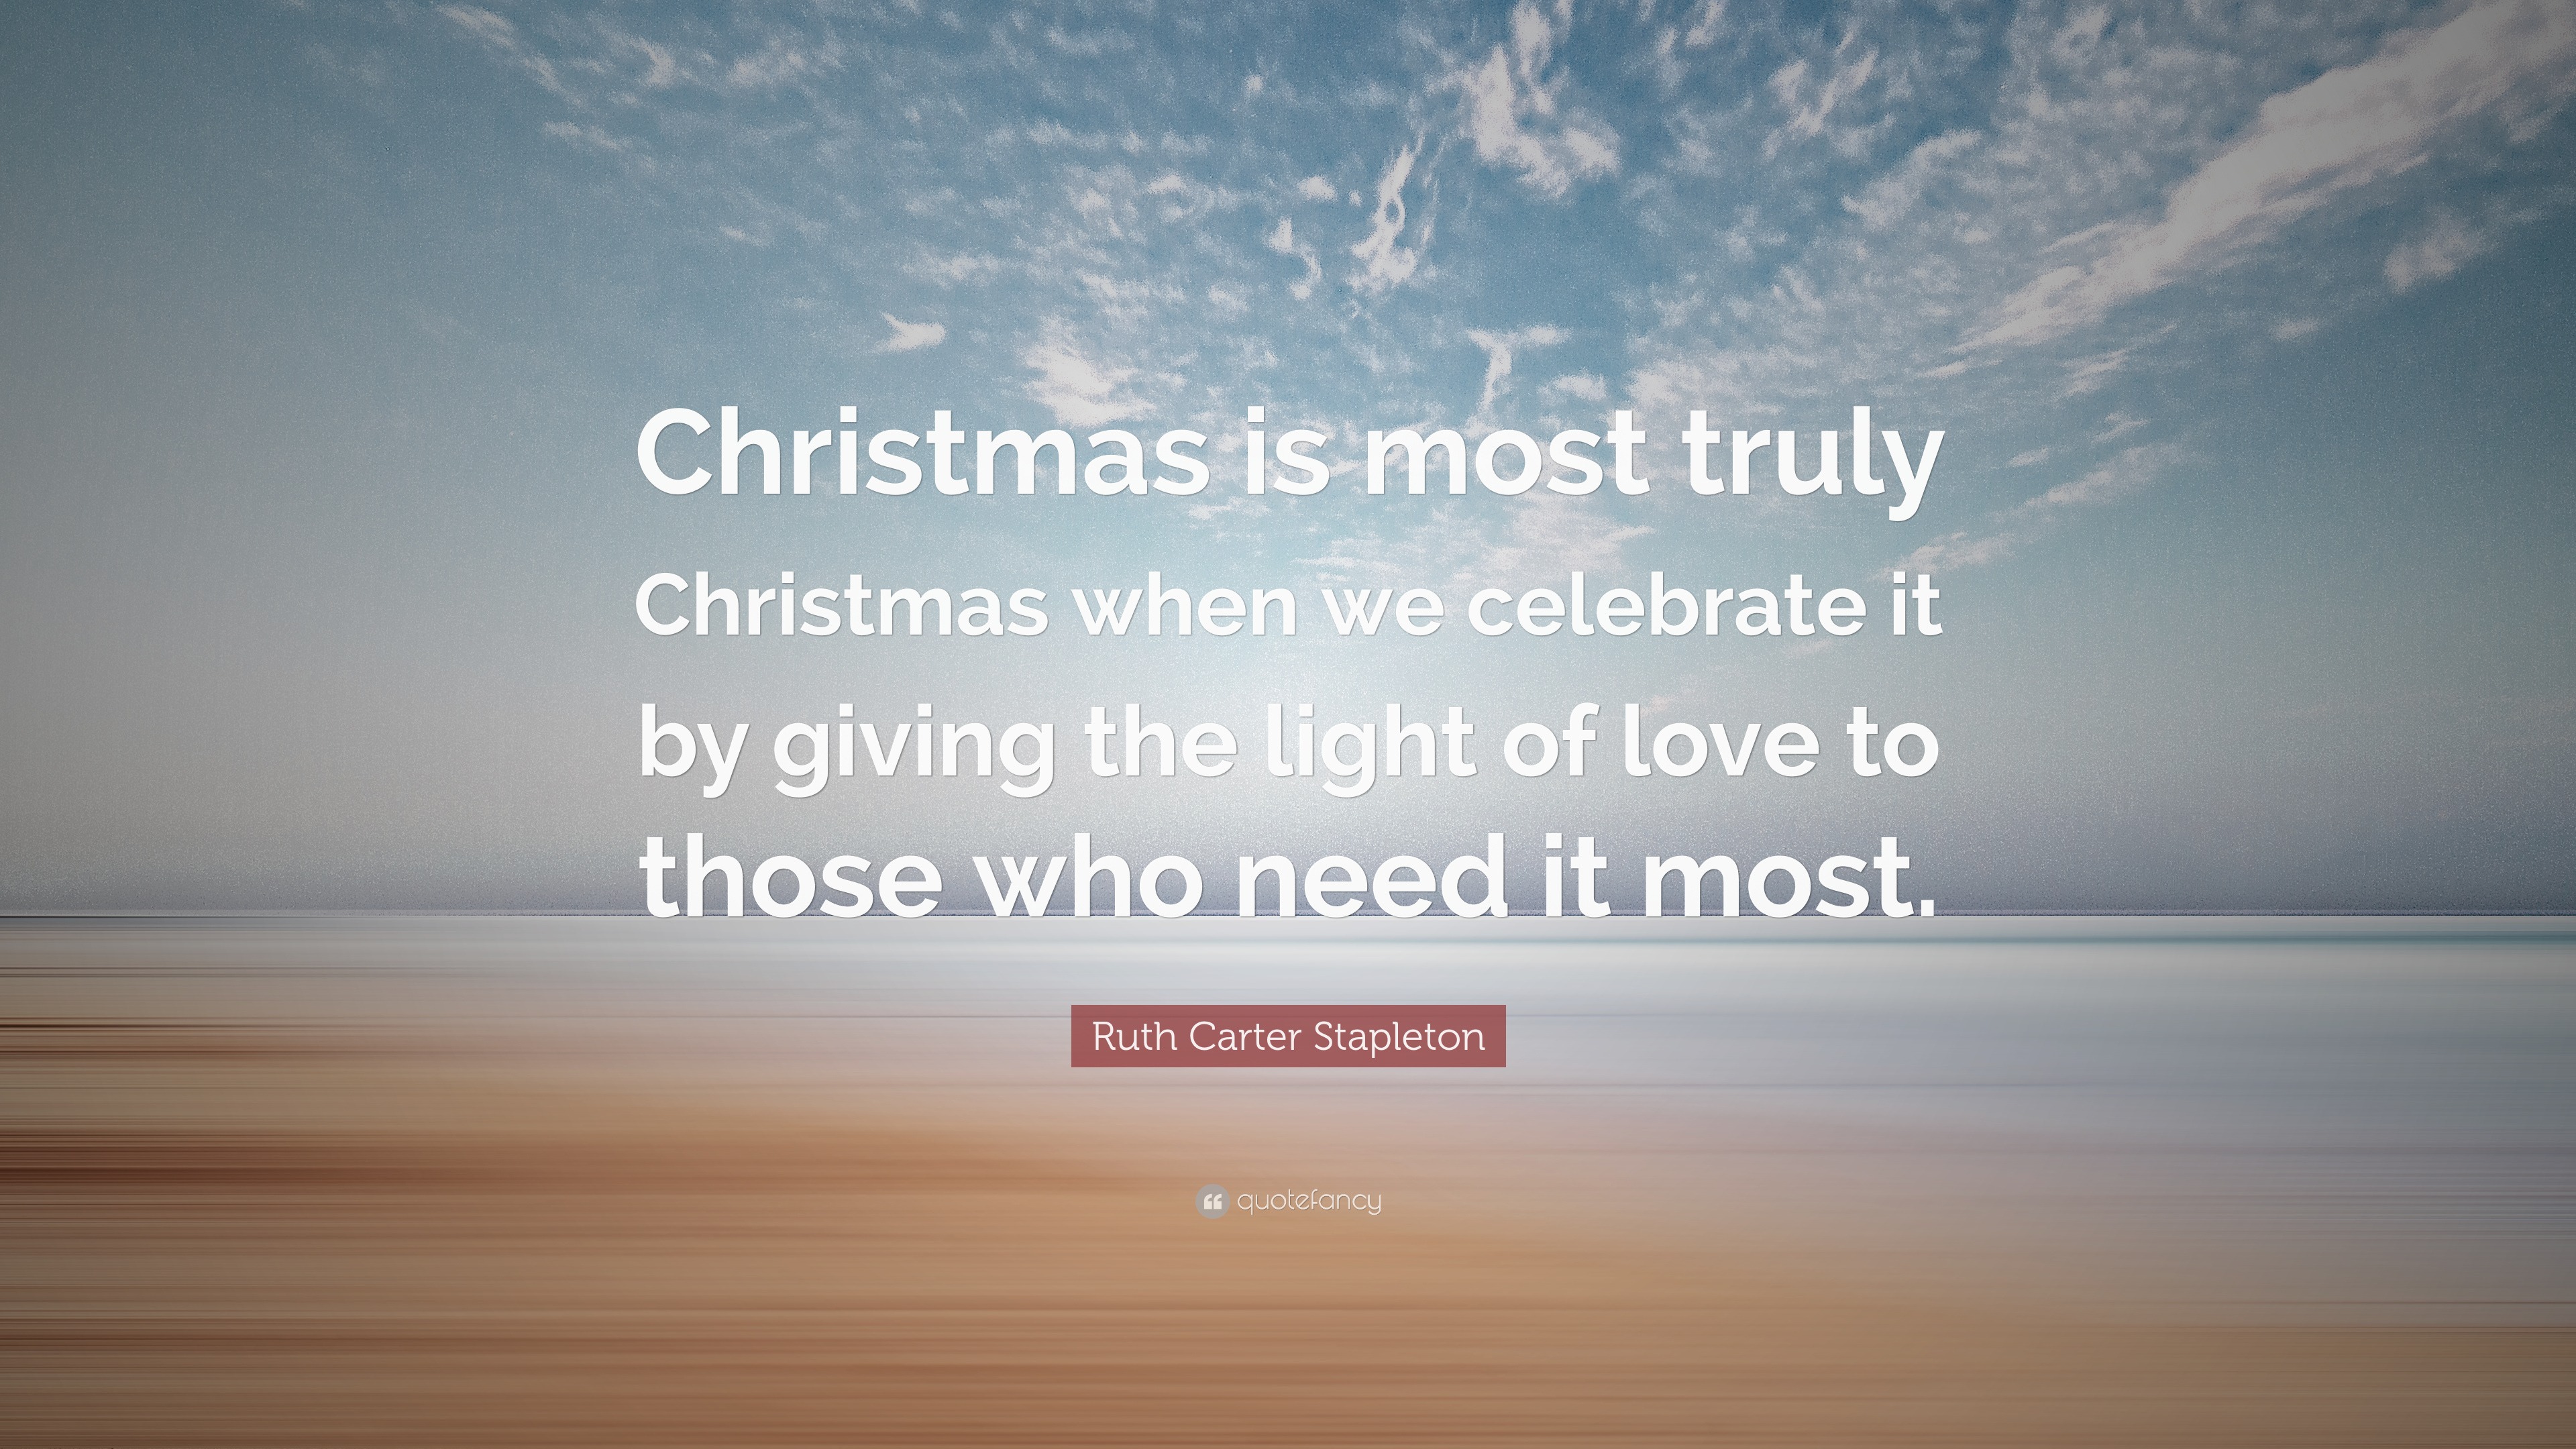 Ruth Carter Stapleton Quote: “Christmas is most truly Christmas when we ...